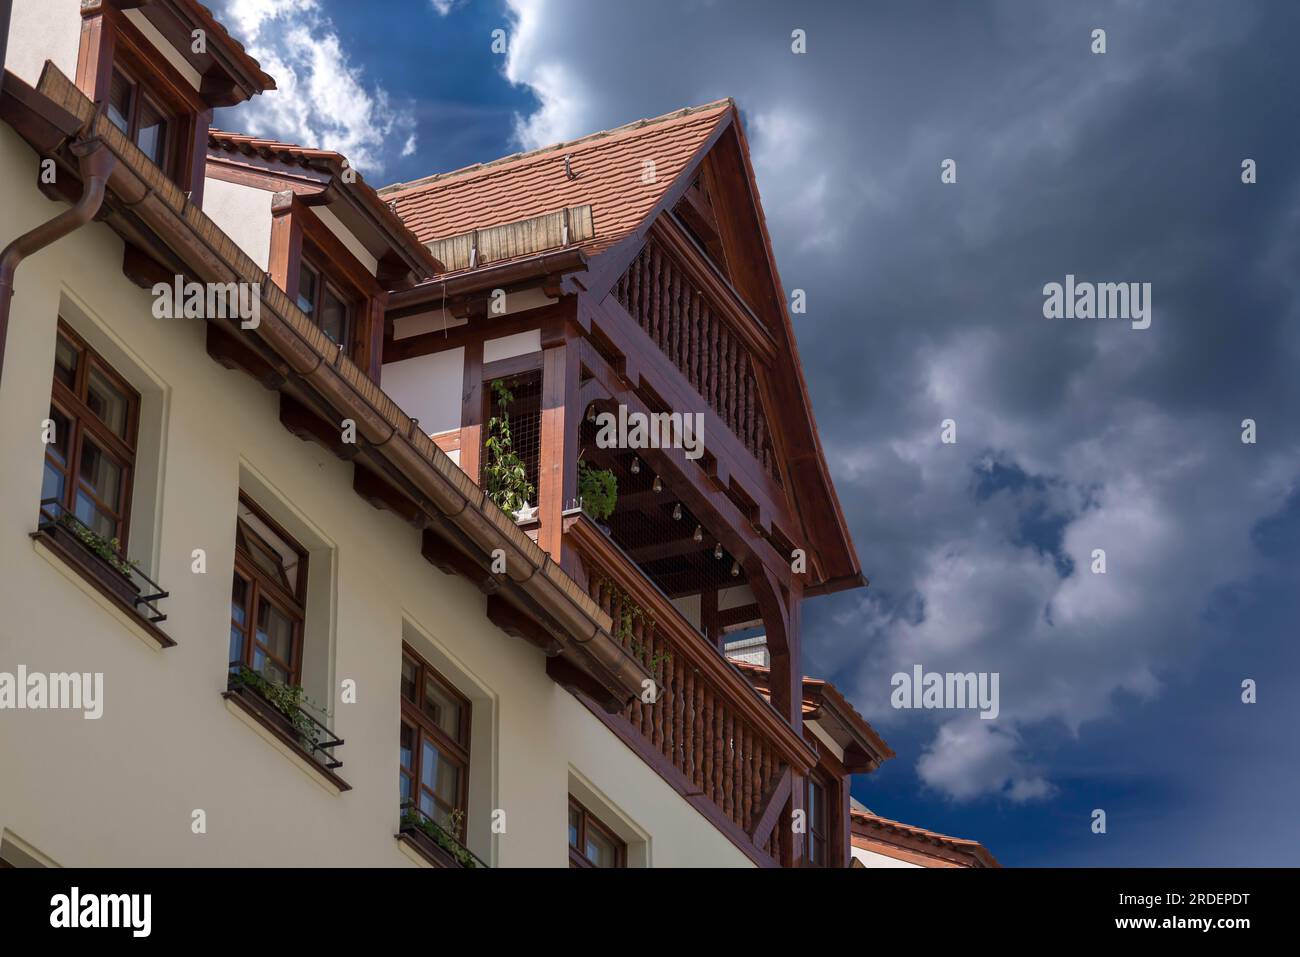 Dormer window on a historic residential and commercial building, Hintere Ledergasse 43, Nuremberg, Middle Franconia, Bavaria, Germany Stock Photo